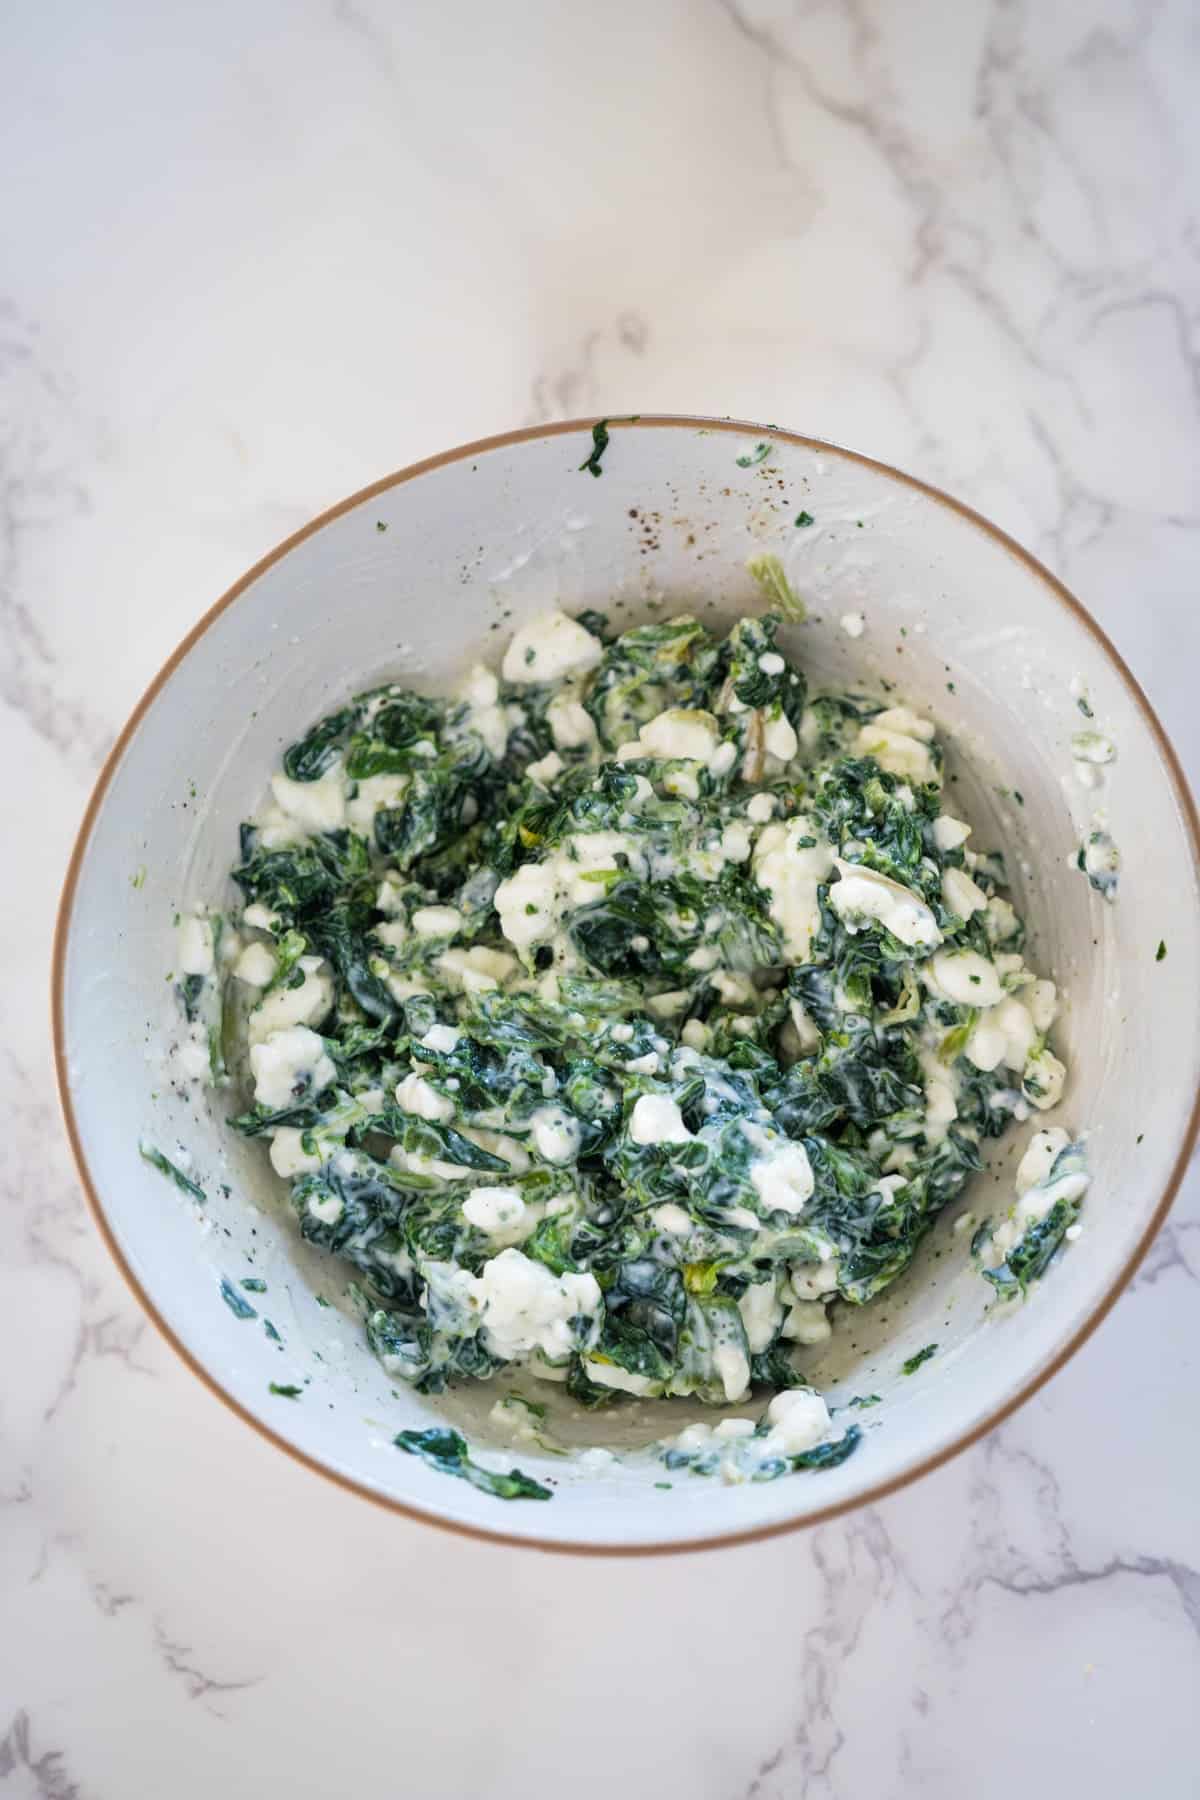 A bowl of creamy spinach and feta cheese mixture on a marble surface.